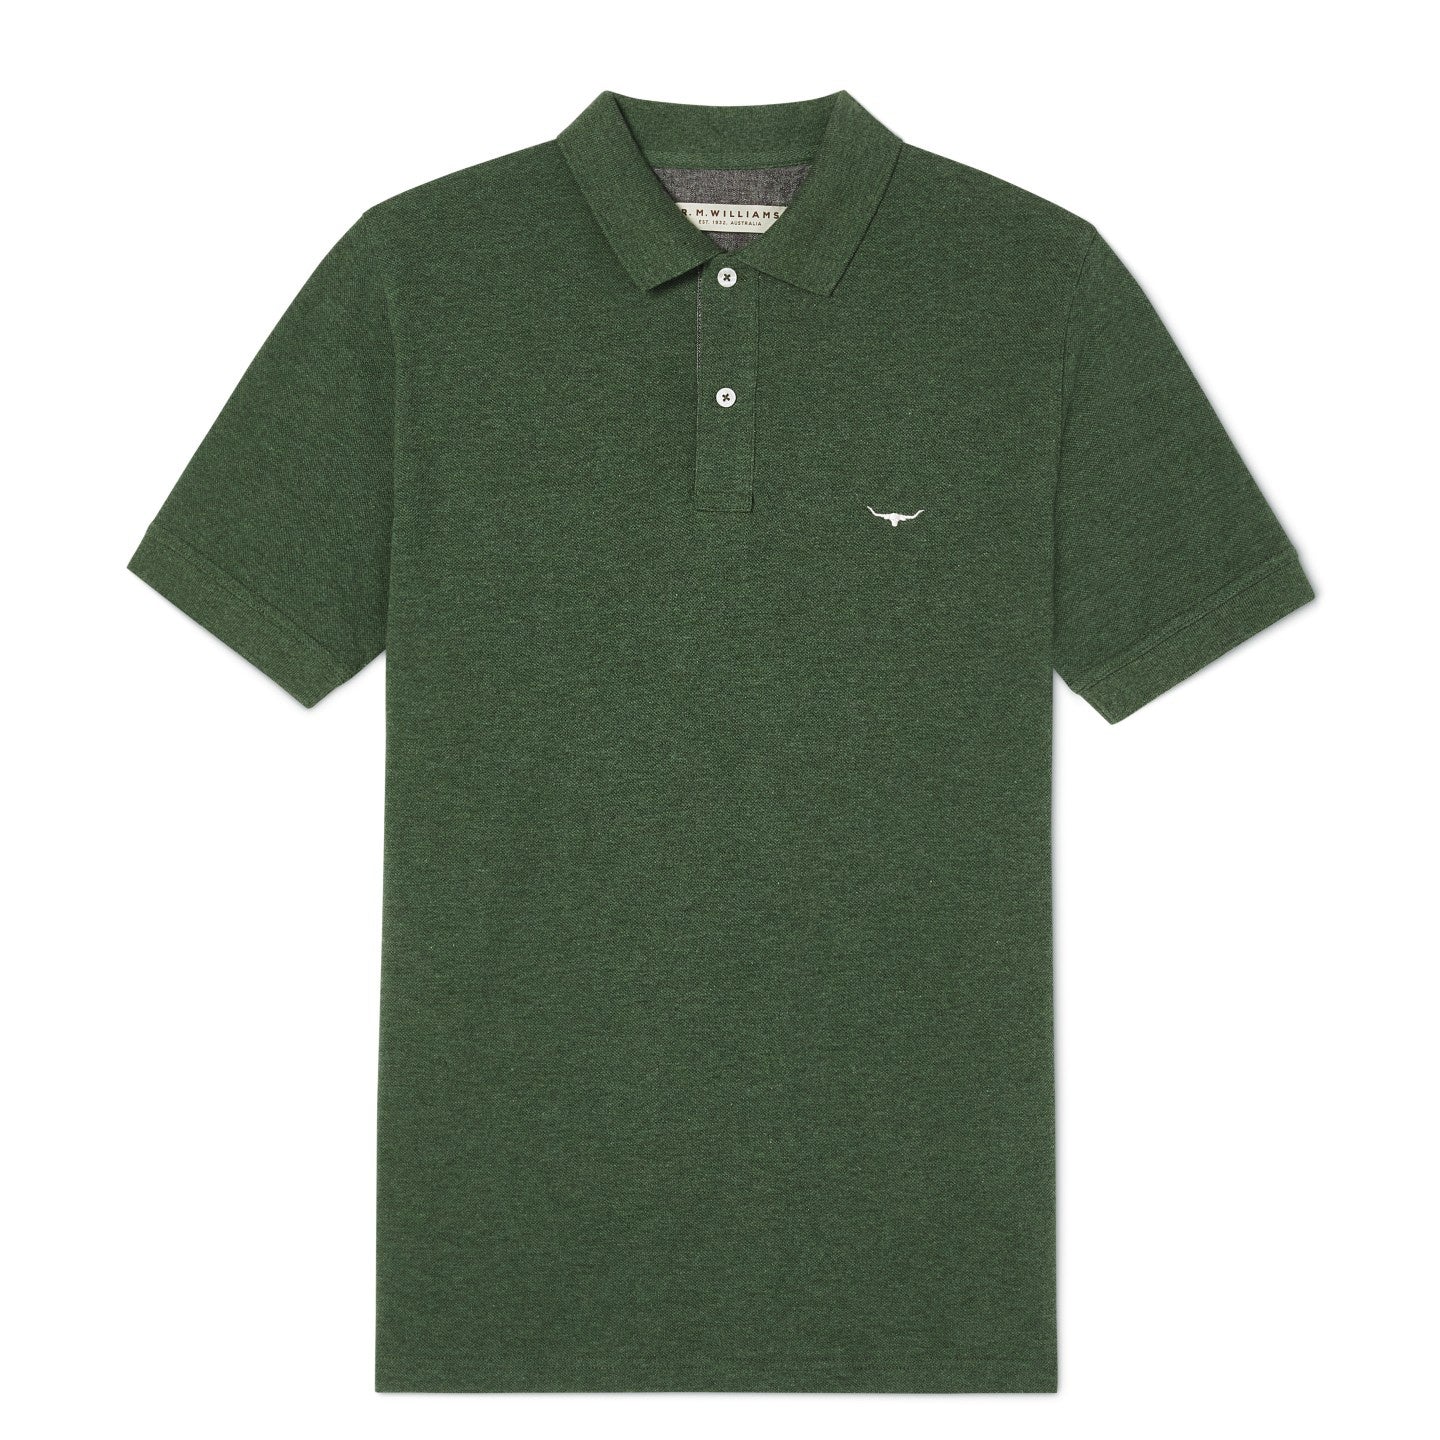 RMW S22 Rokewood Polo - Thomson's Suits Ltd - Green Marle - S - 59058